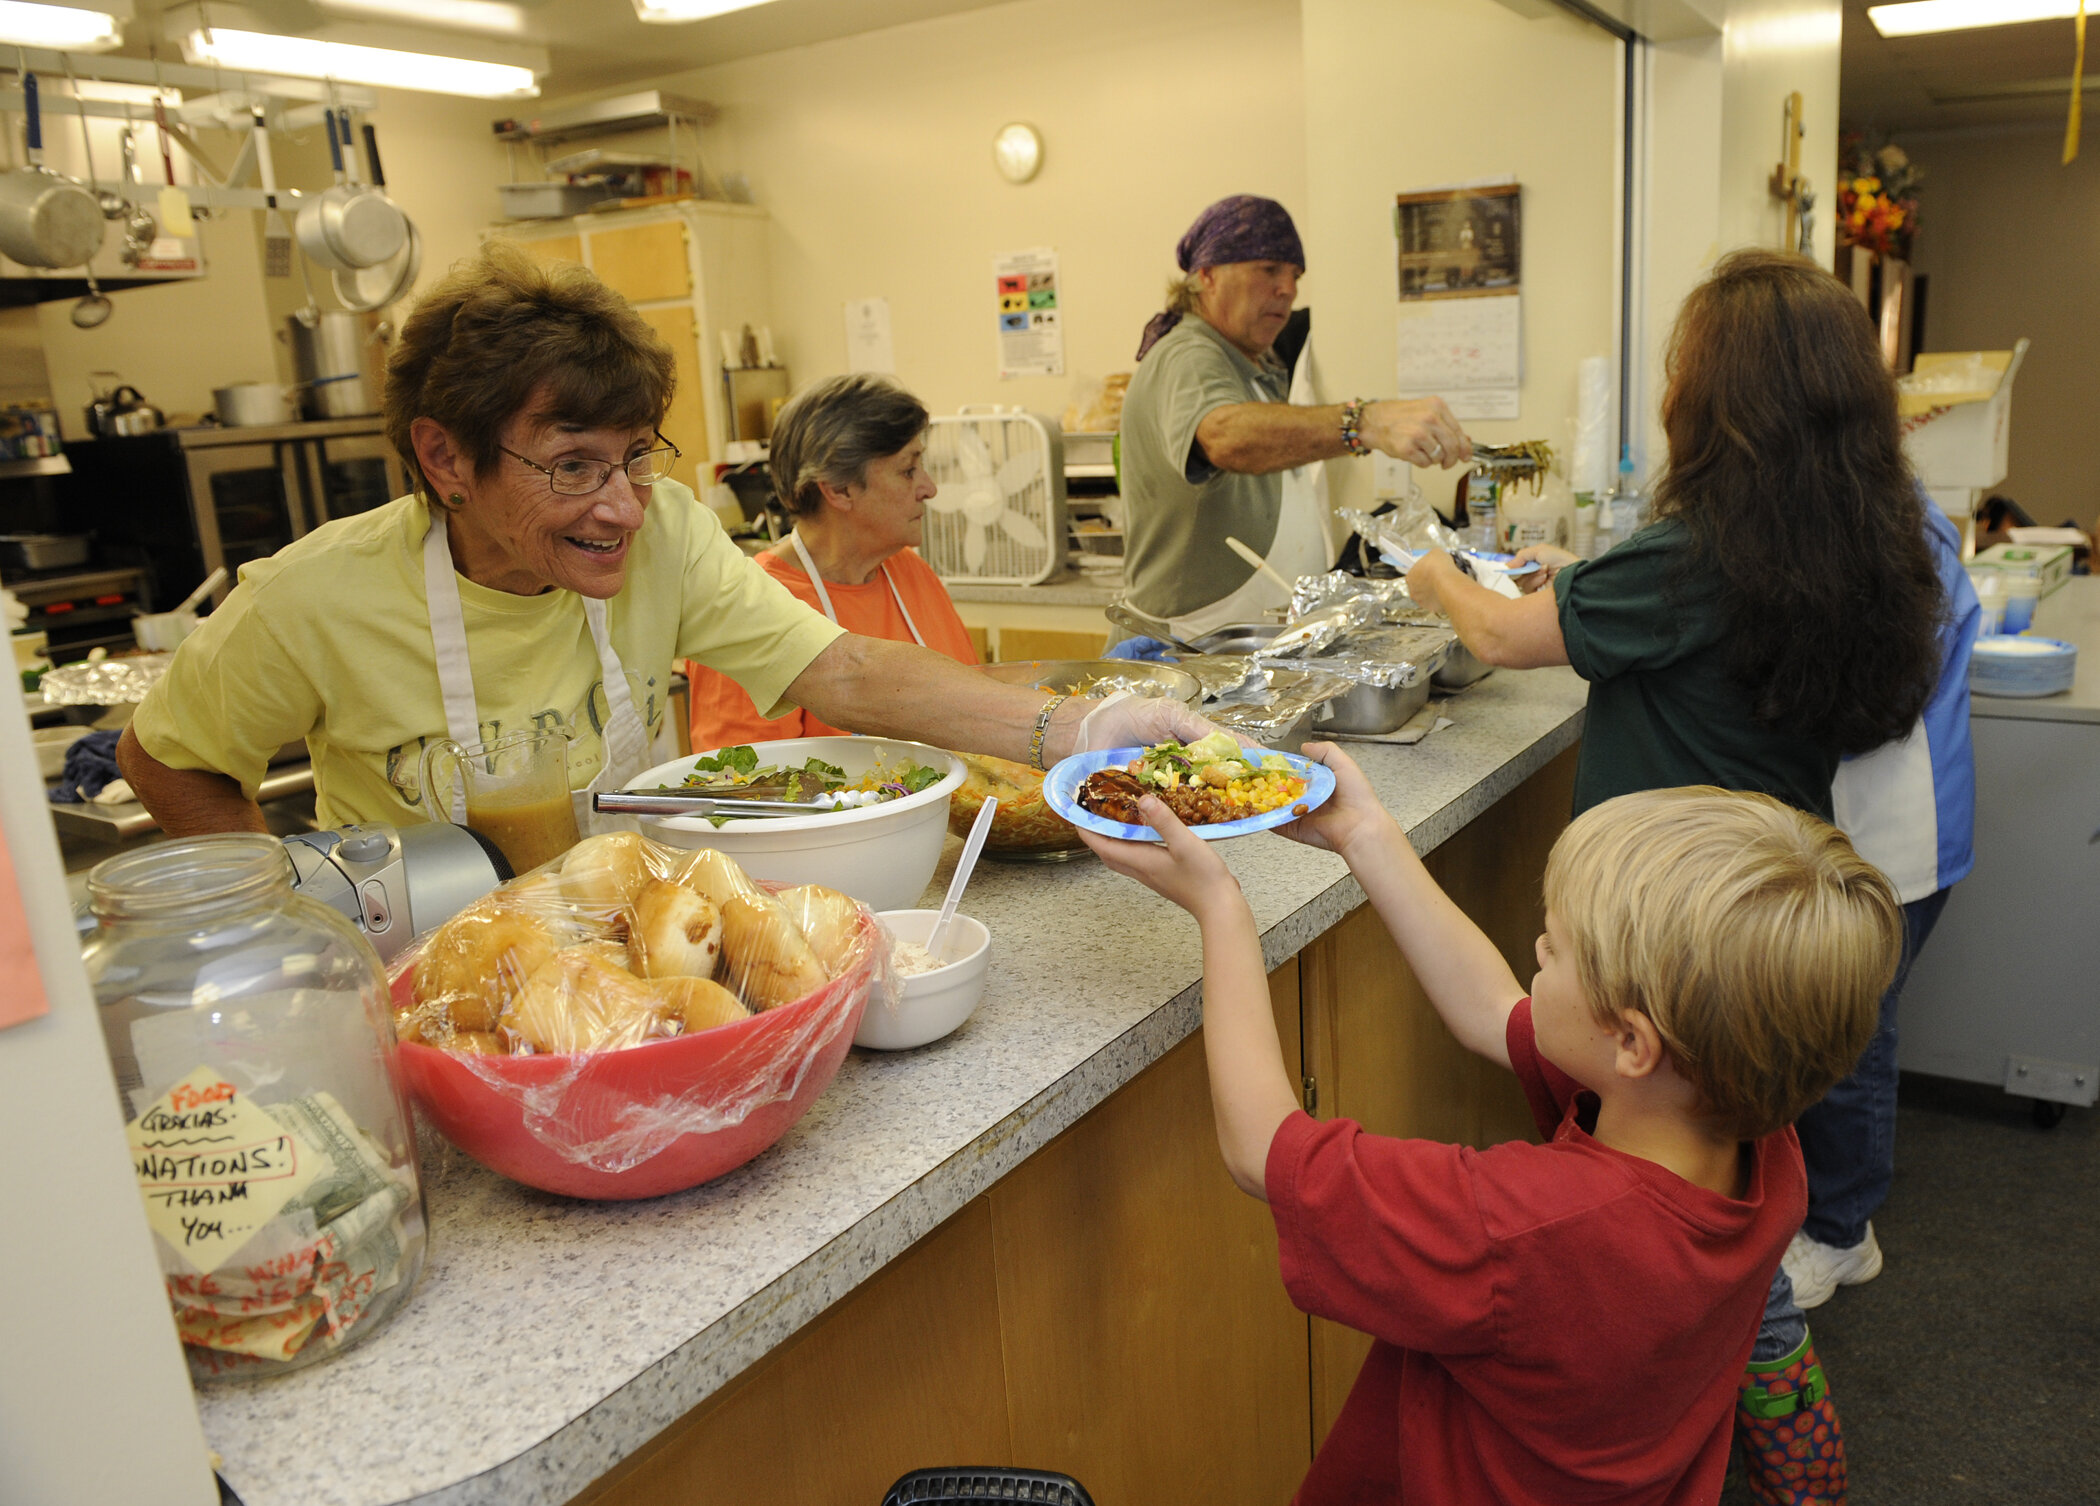  Mary Miller serves meals at St. Leo’s Hall. Photo by Gordon Miller 